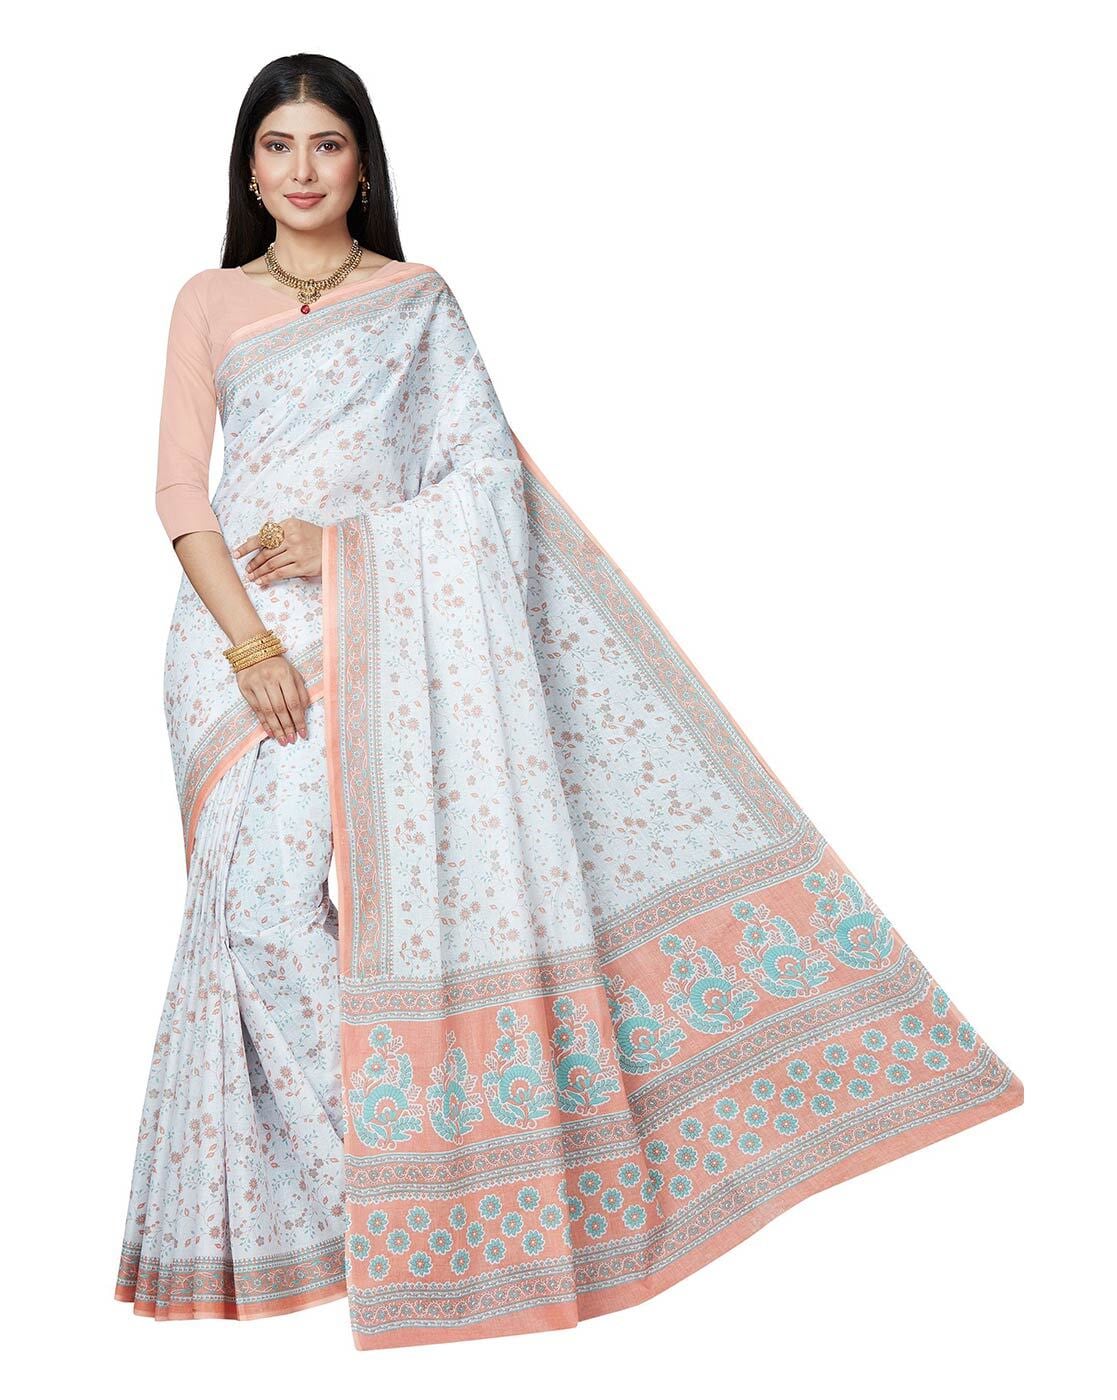 Buy New Designer Saree Women's White Colour Chanderi Cotton Saree With  Jacquard Fabric Border & Blouse Sarees Online at Low Prices in India -  Paytmmall.com